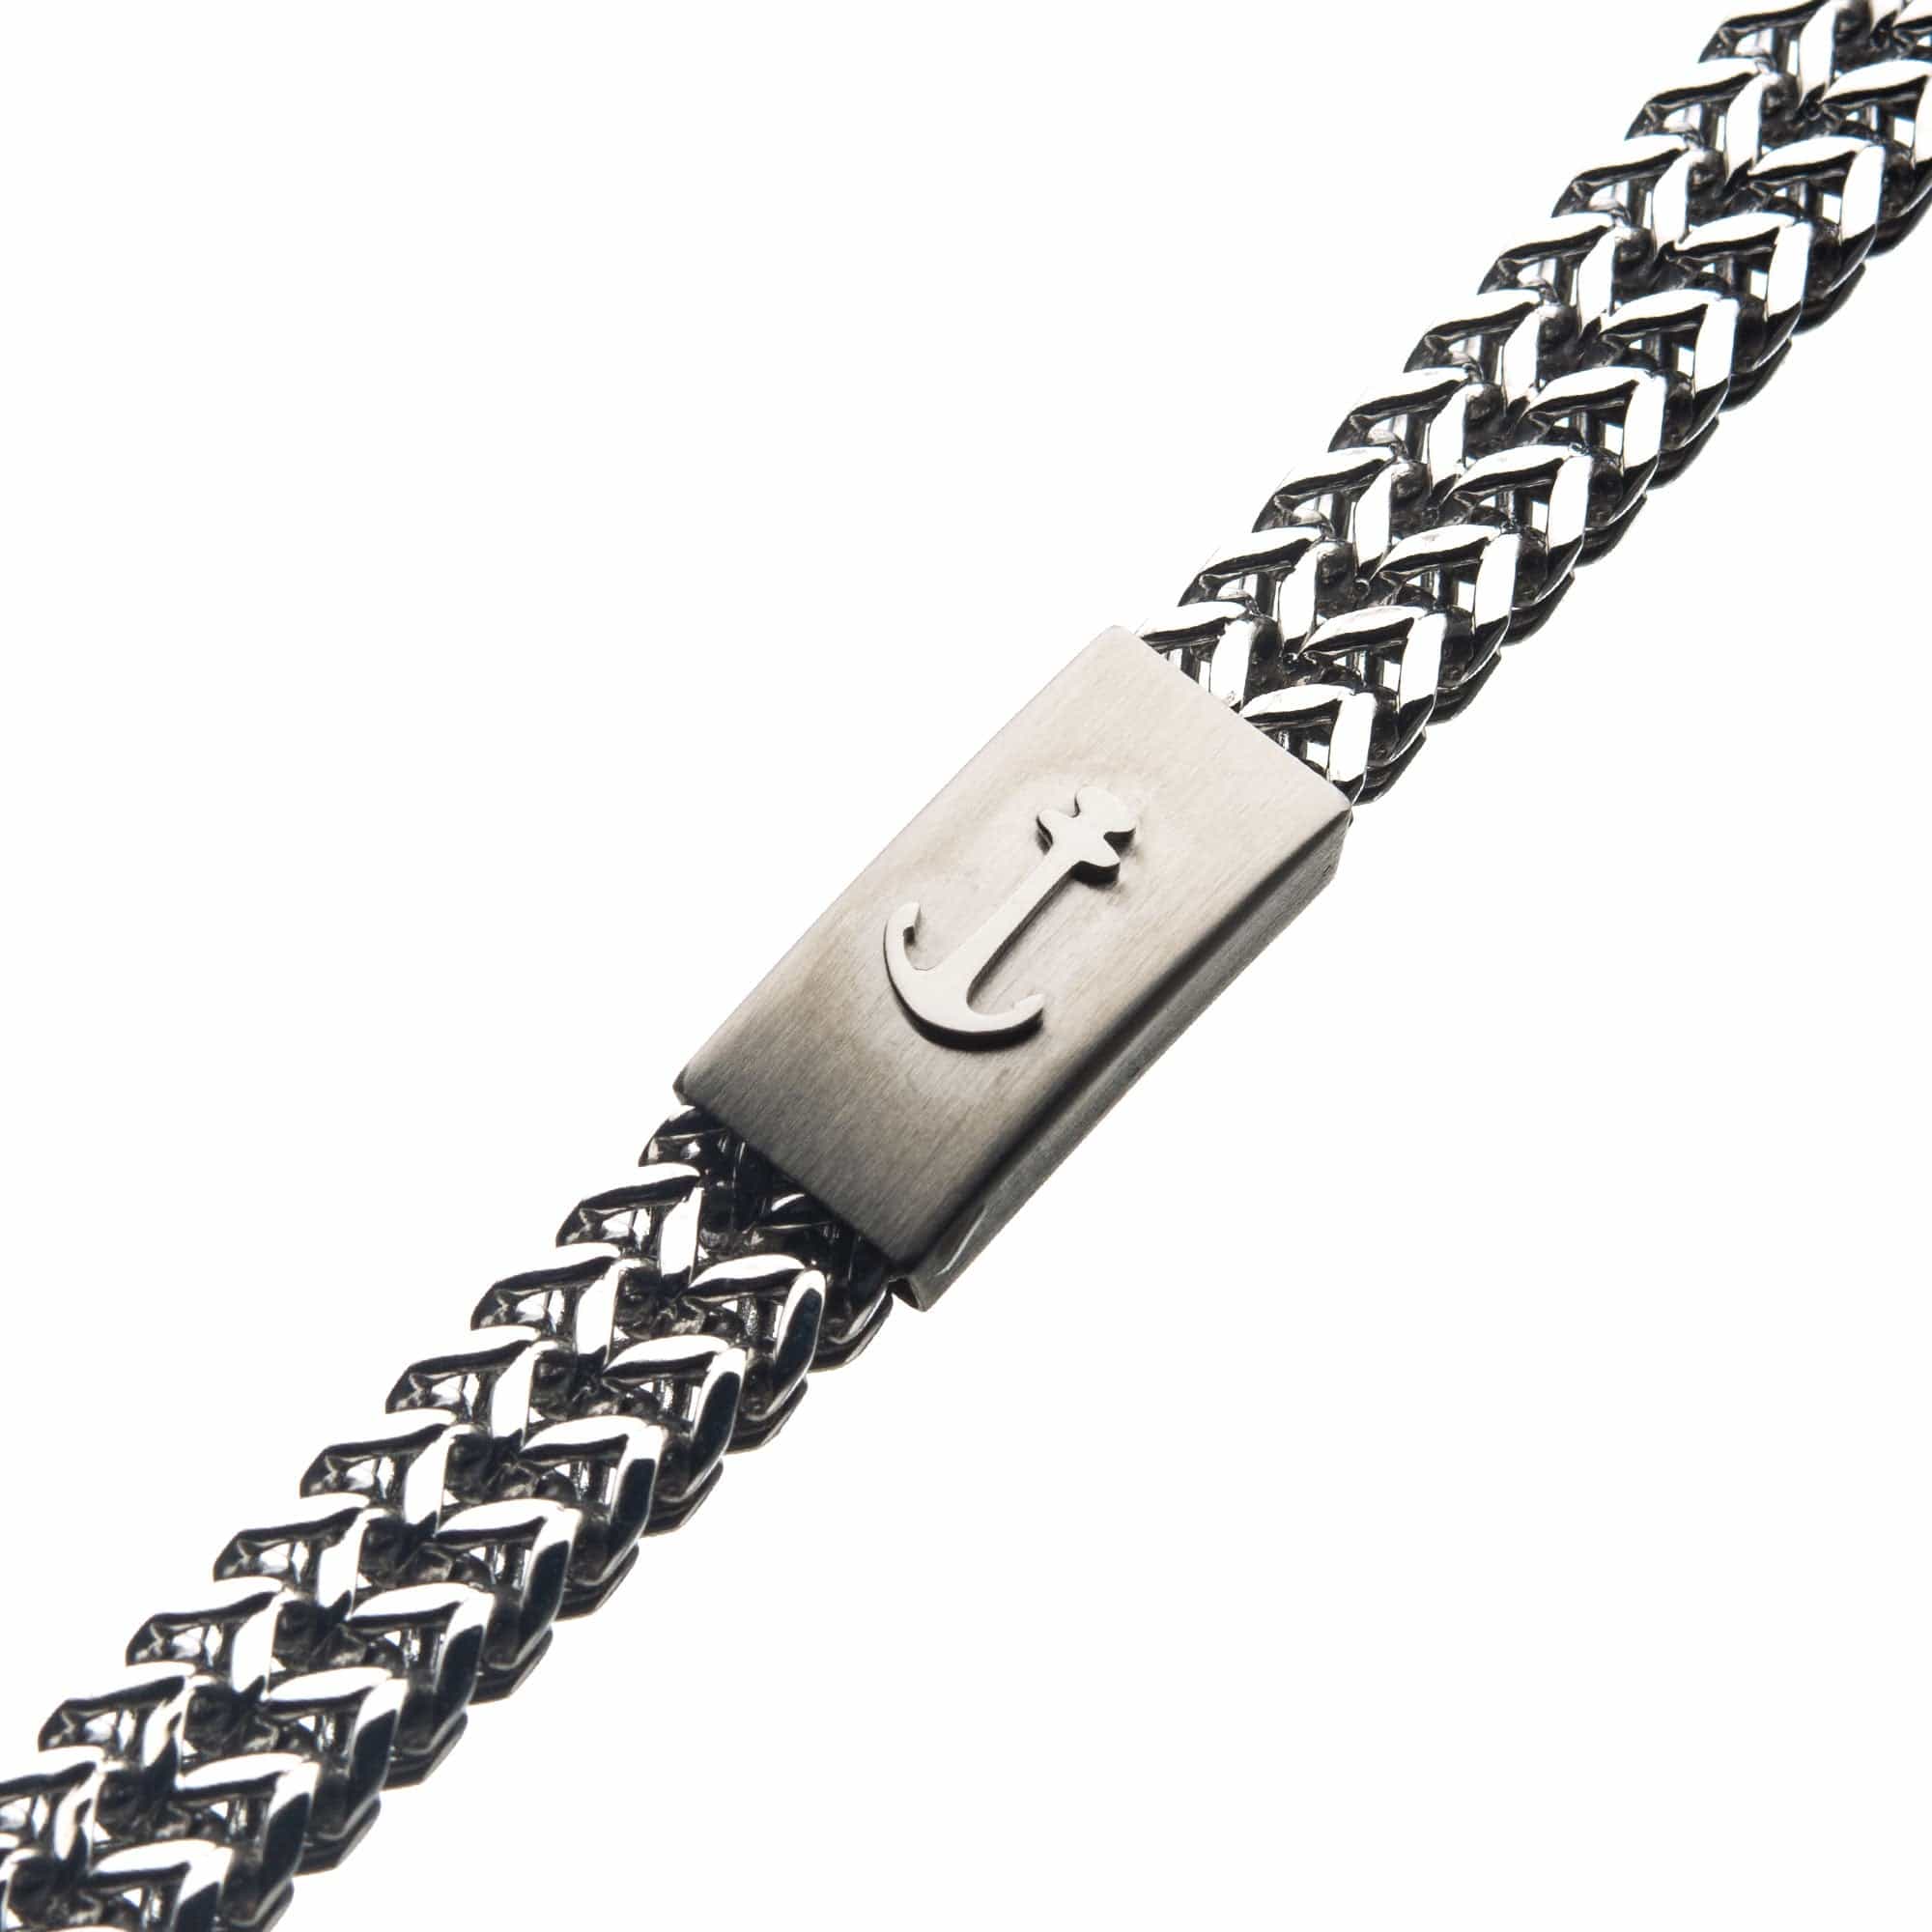 INOX JEWELRY Bracelets Silver Tone Stainless Steel Anchor Design Double Franco Chain Link Bracelet BR35189